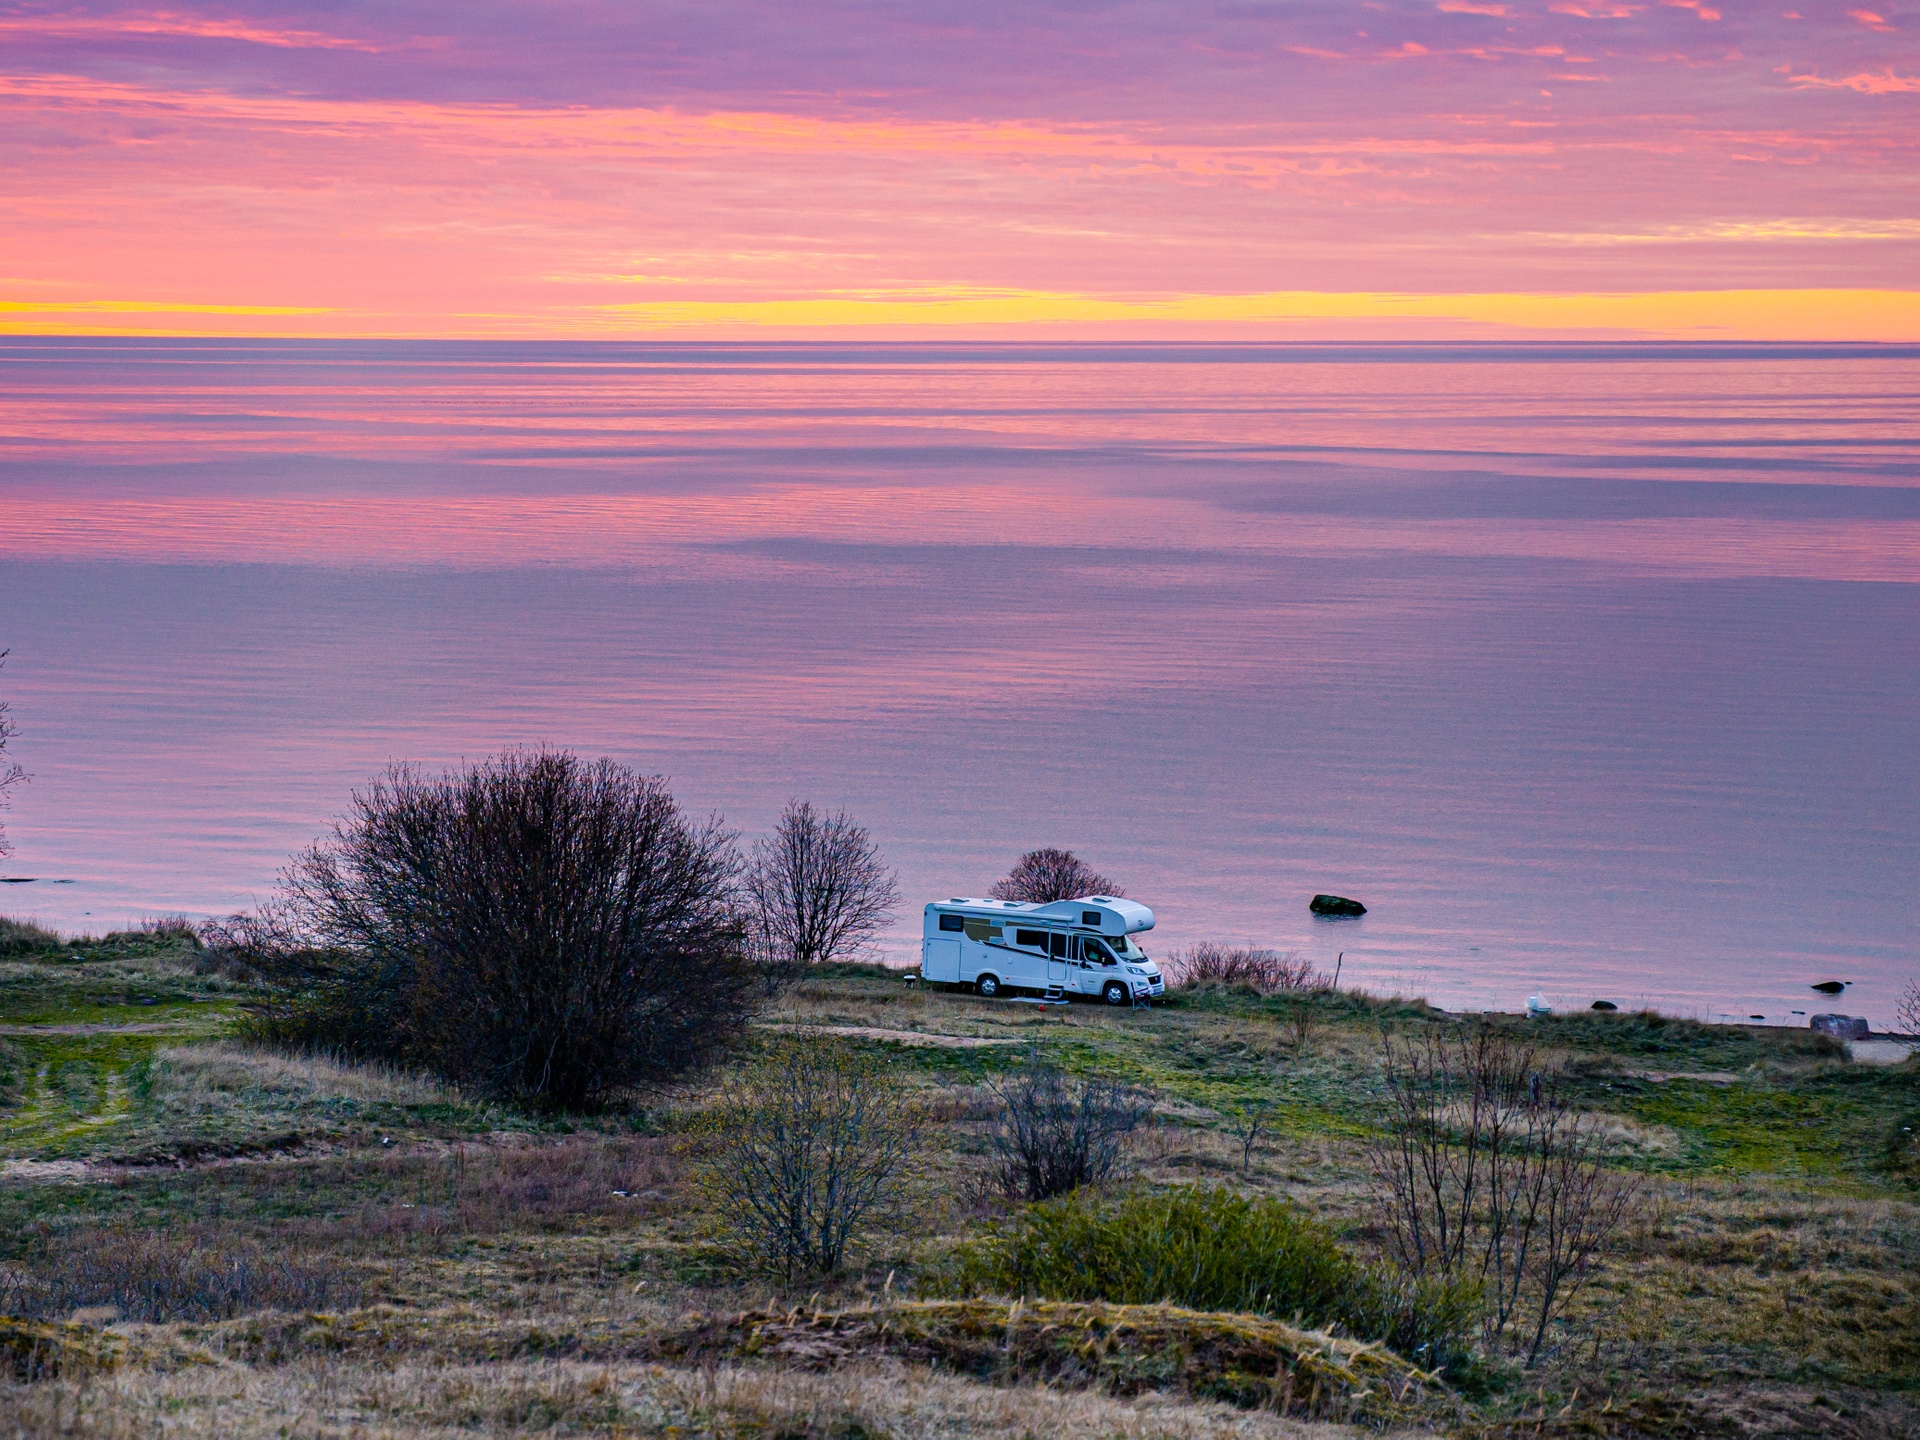 Caravan parked next to the Baltic Sea at sunset